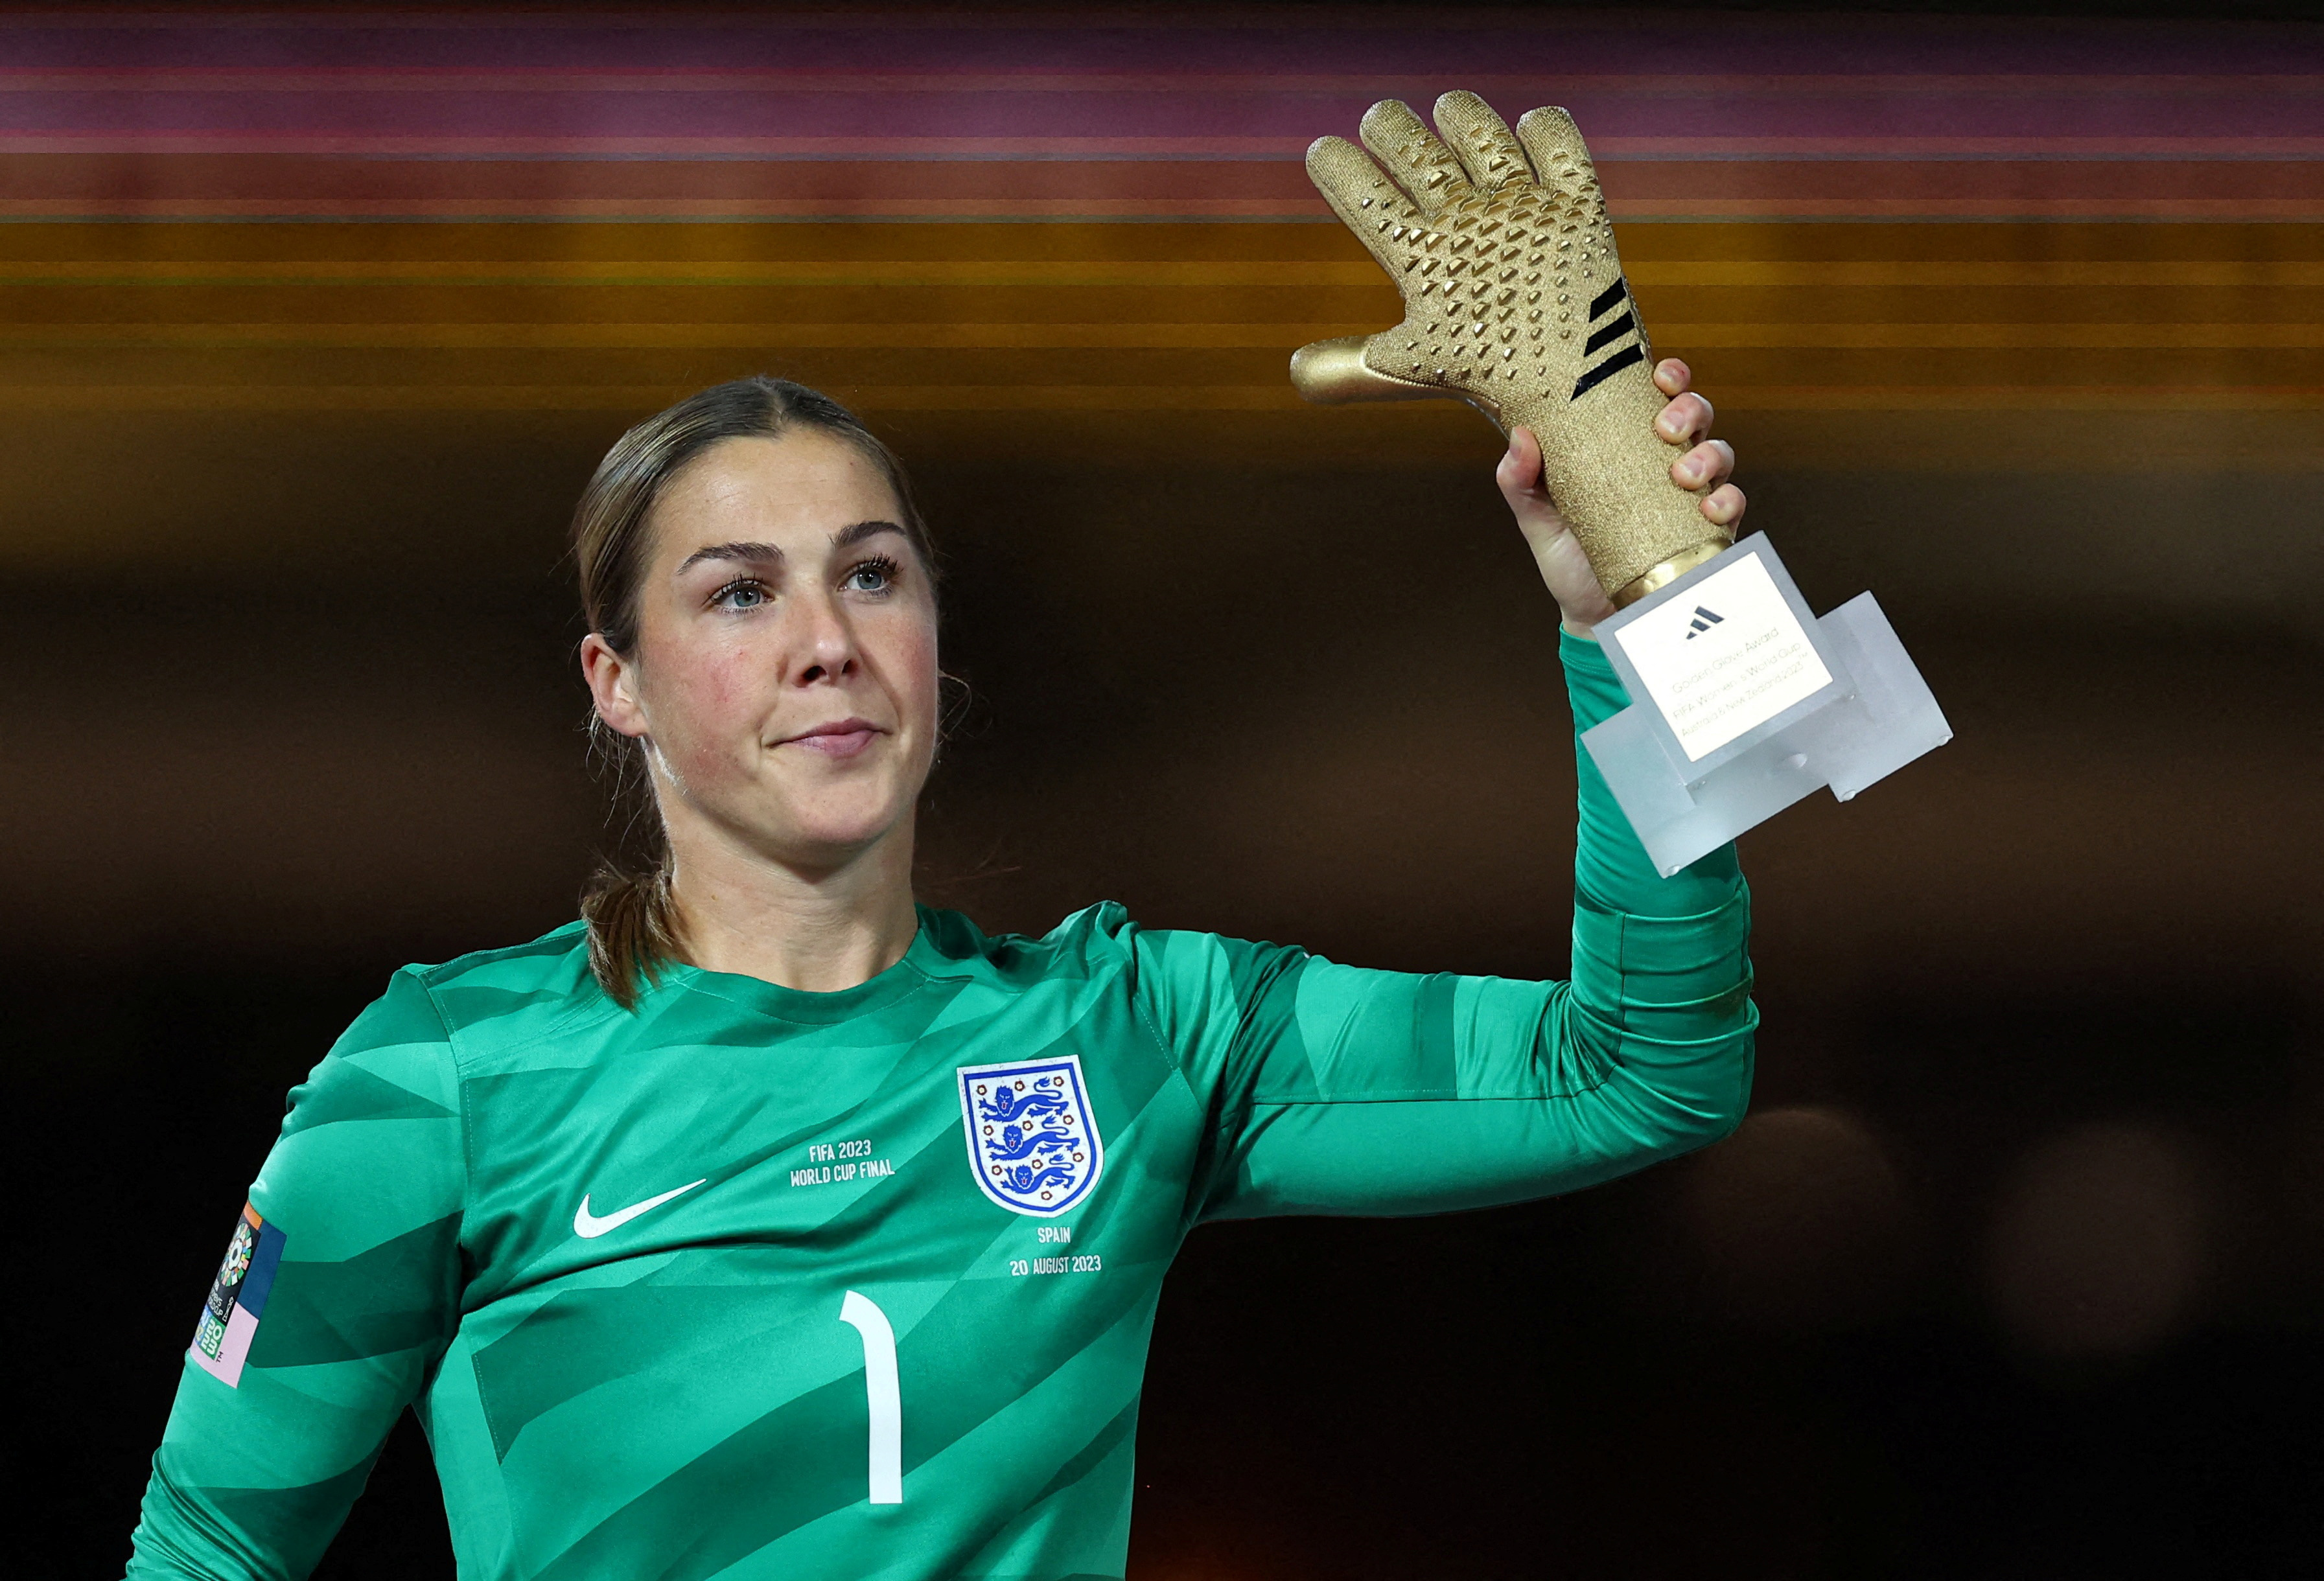 Mary Earps' England goalkeeper shirts have already sold out after